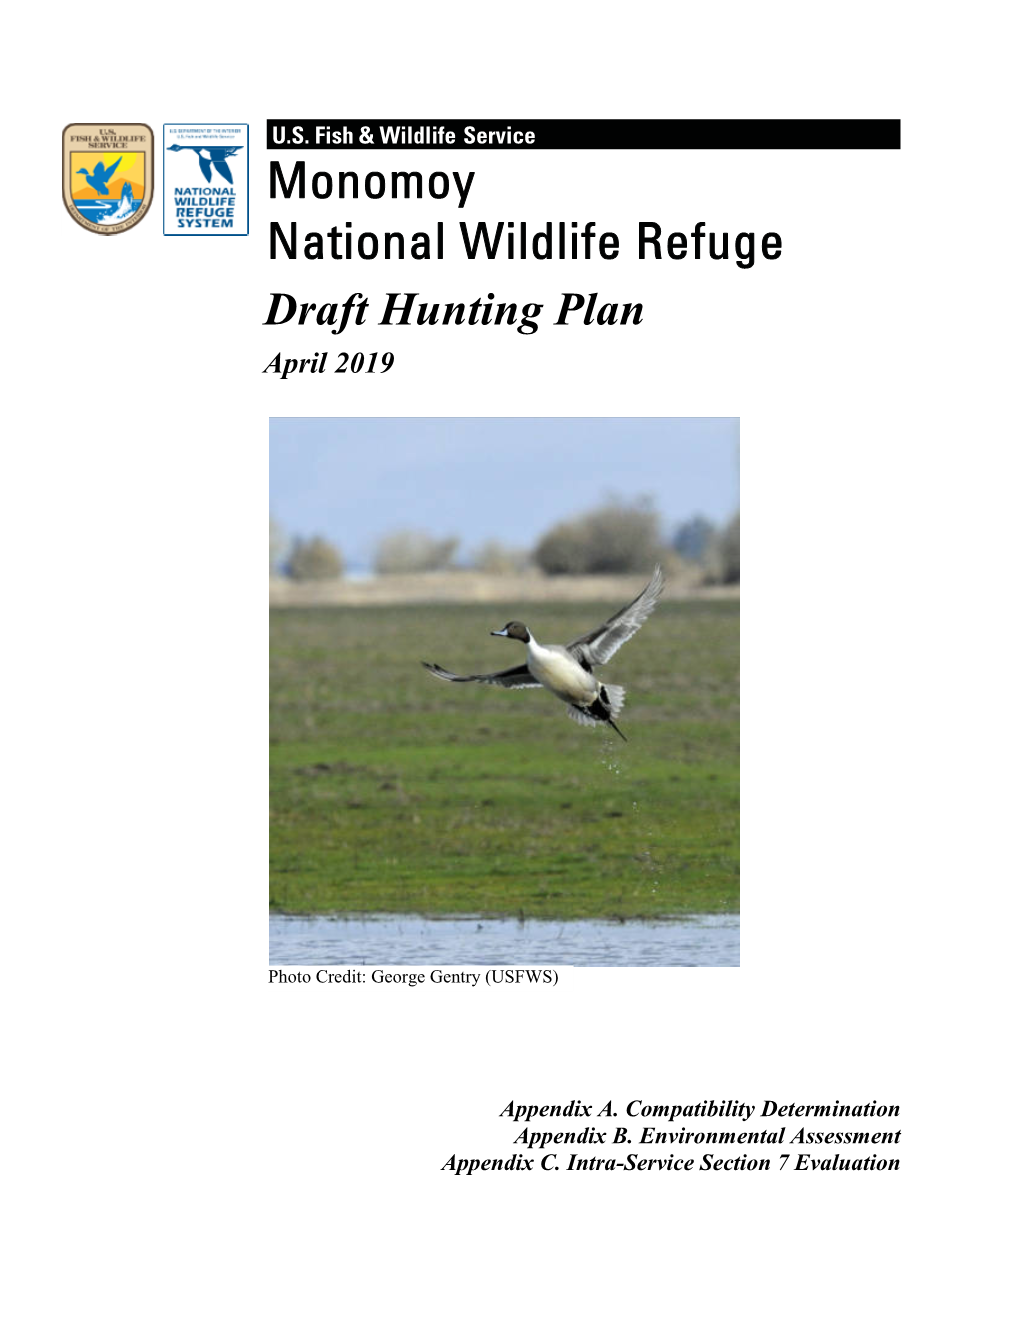 Monomoy National Wildlife Refuge Hunting Plan, with Compatibility